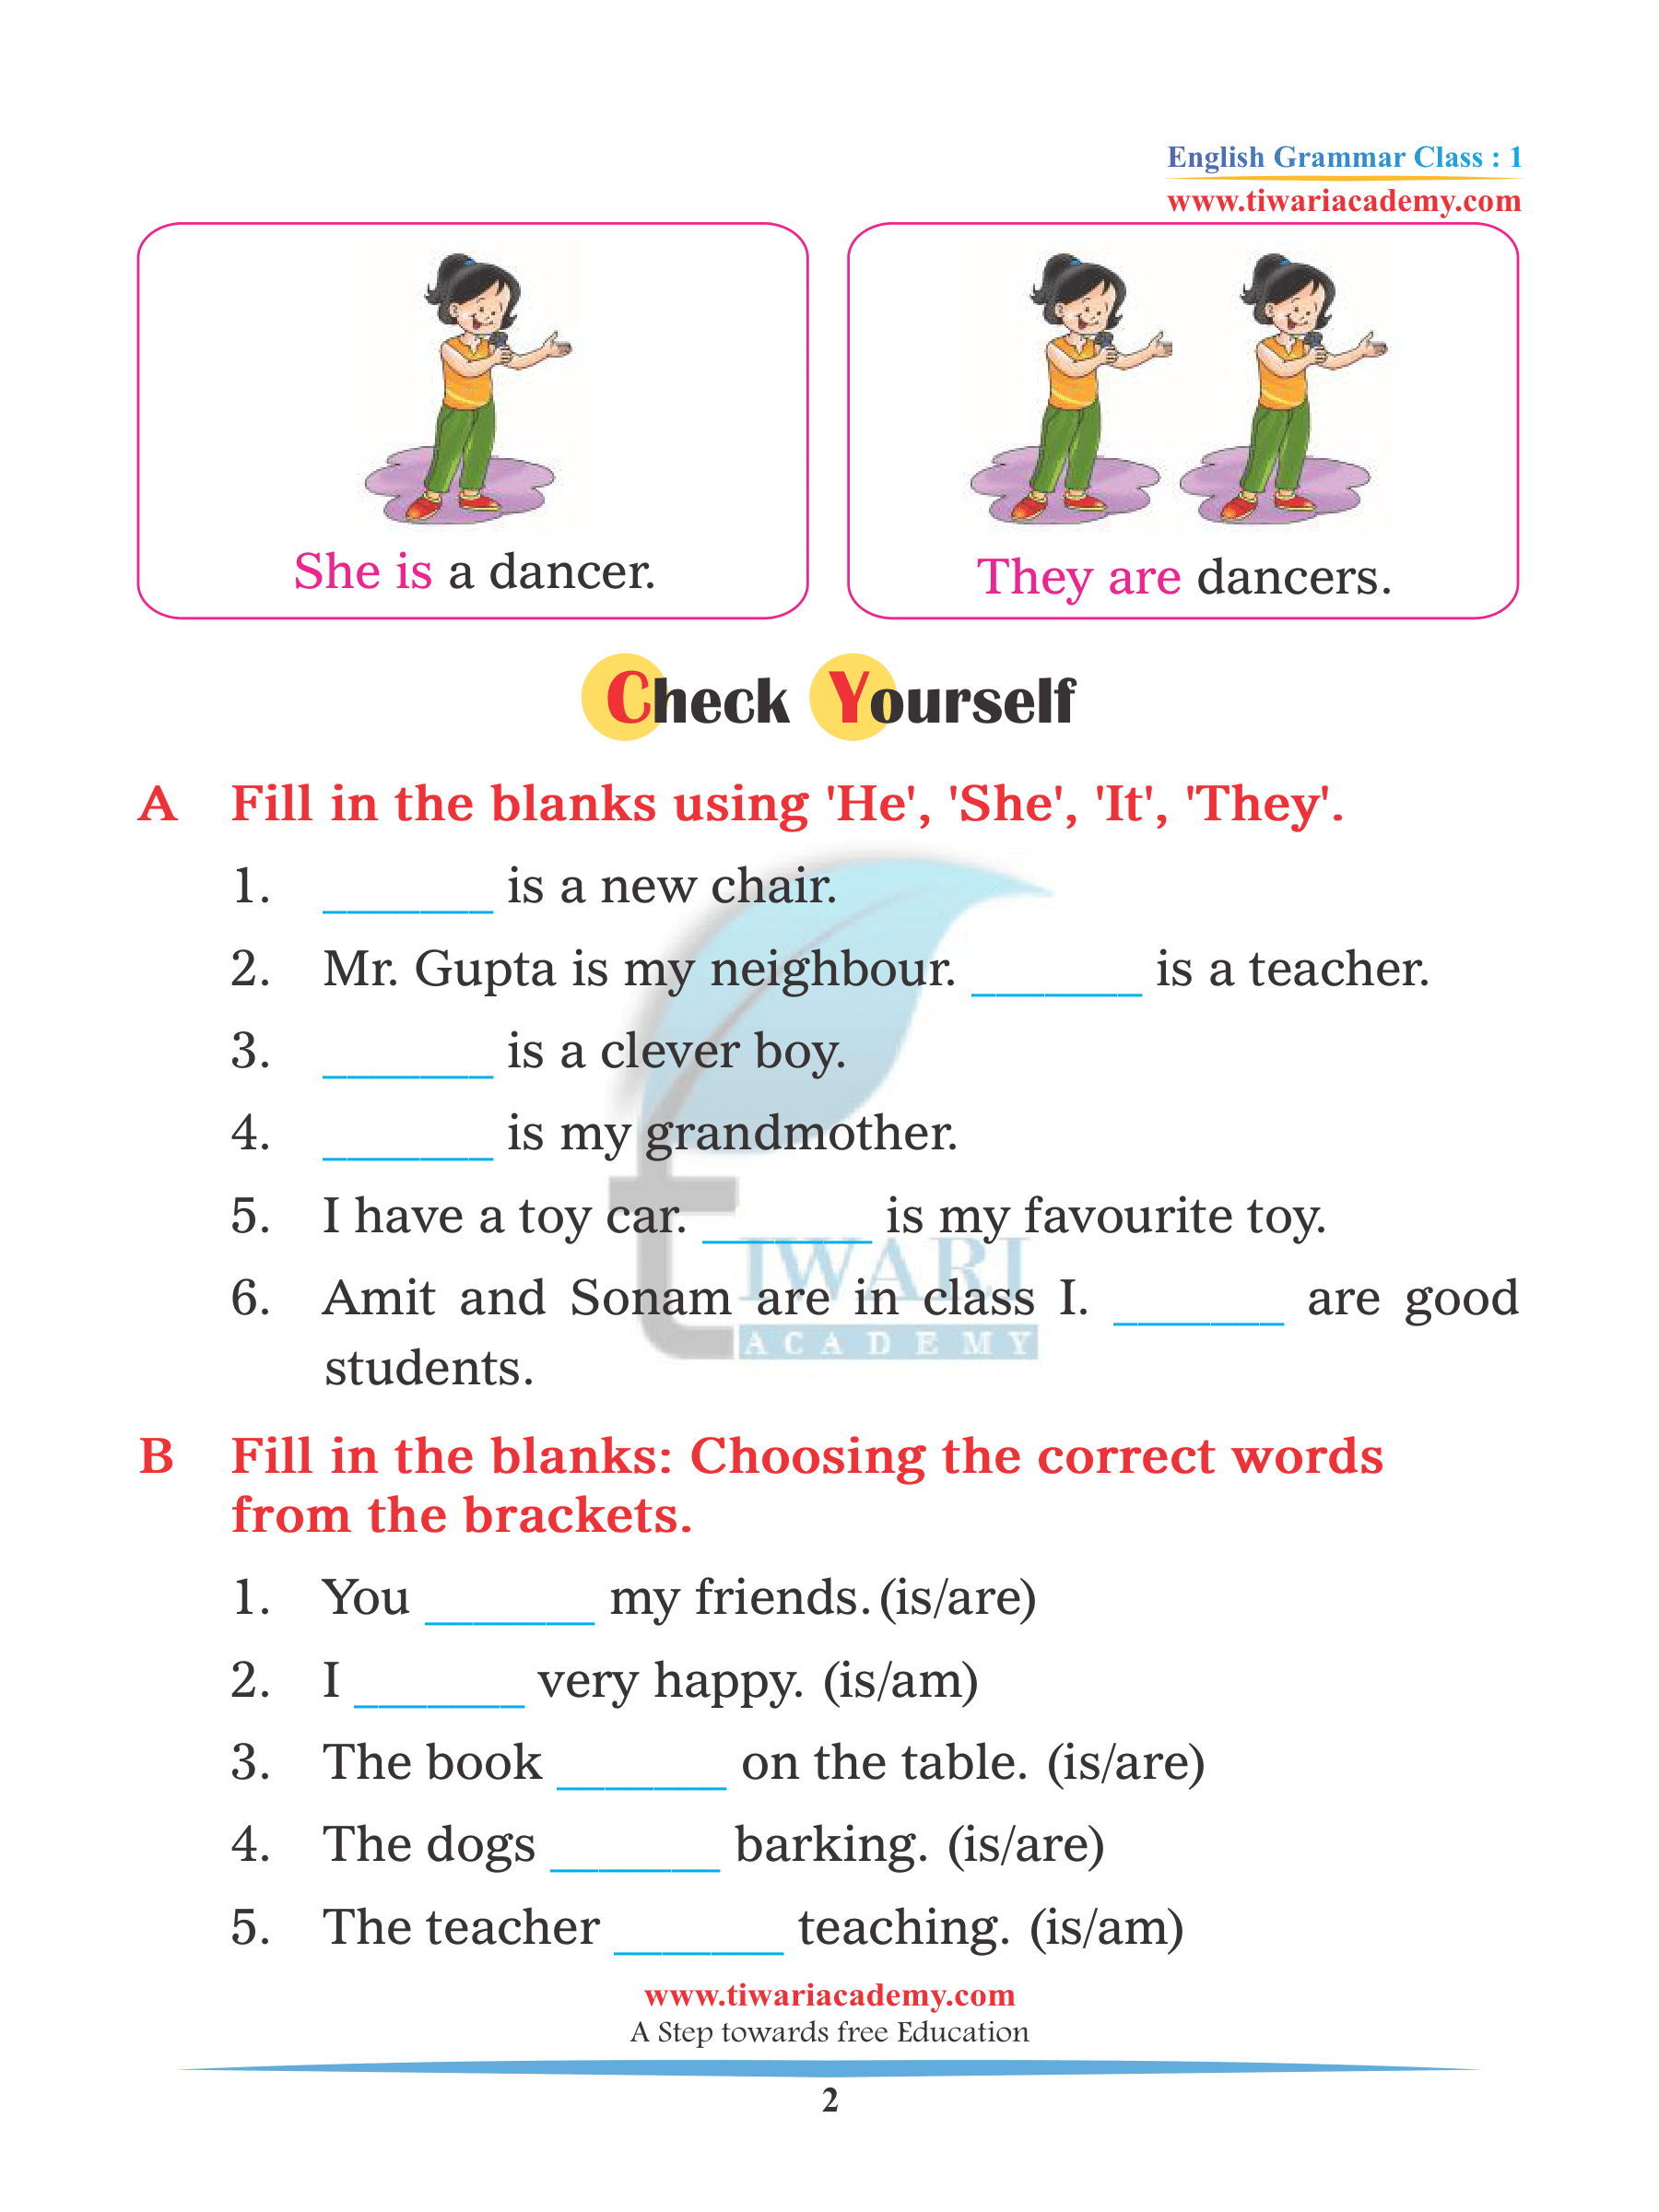 English Grammar for grade 1 use of Am, Is, and Are